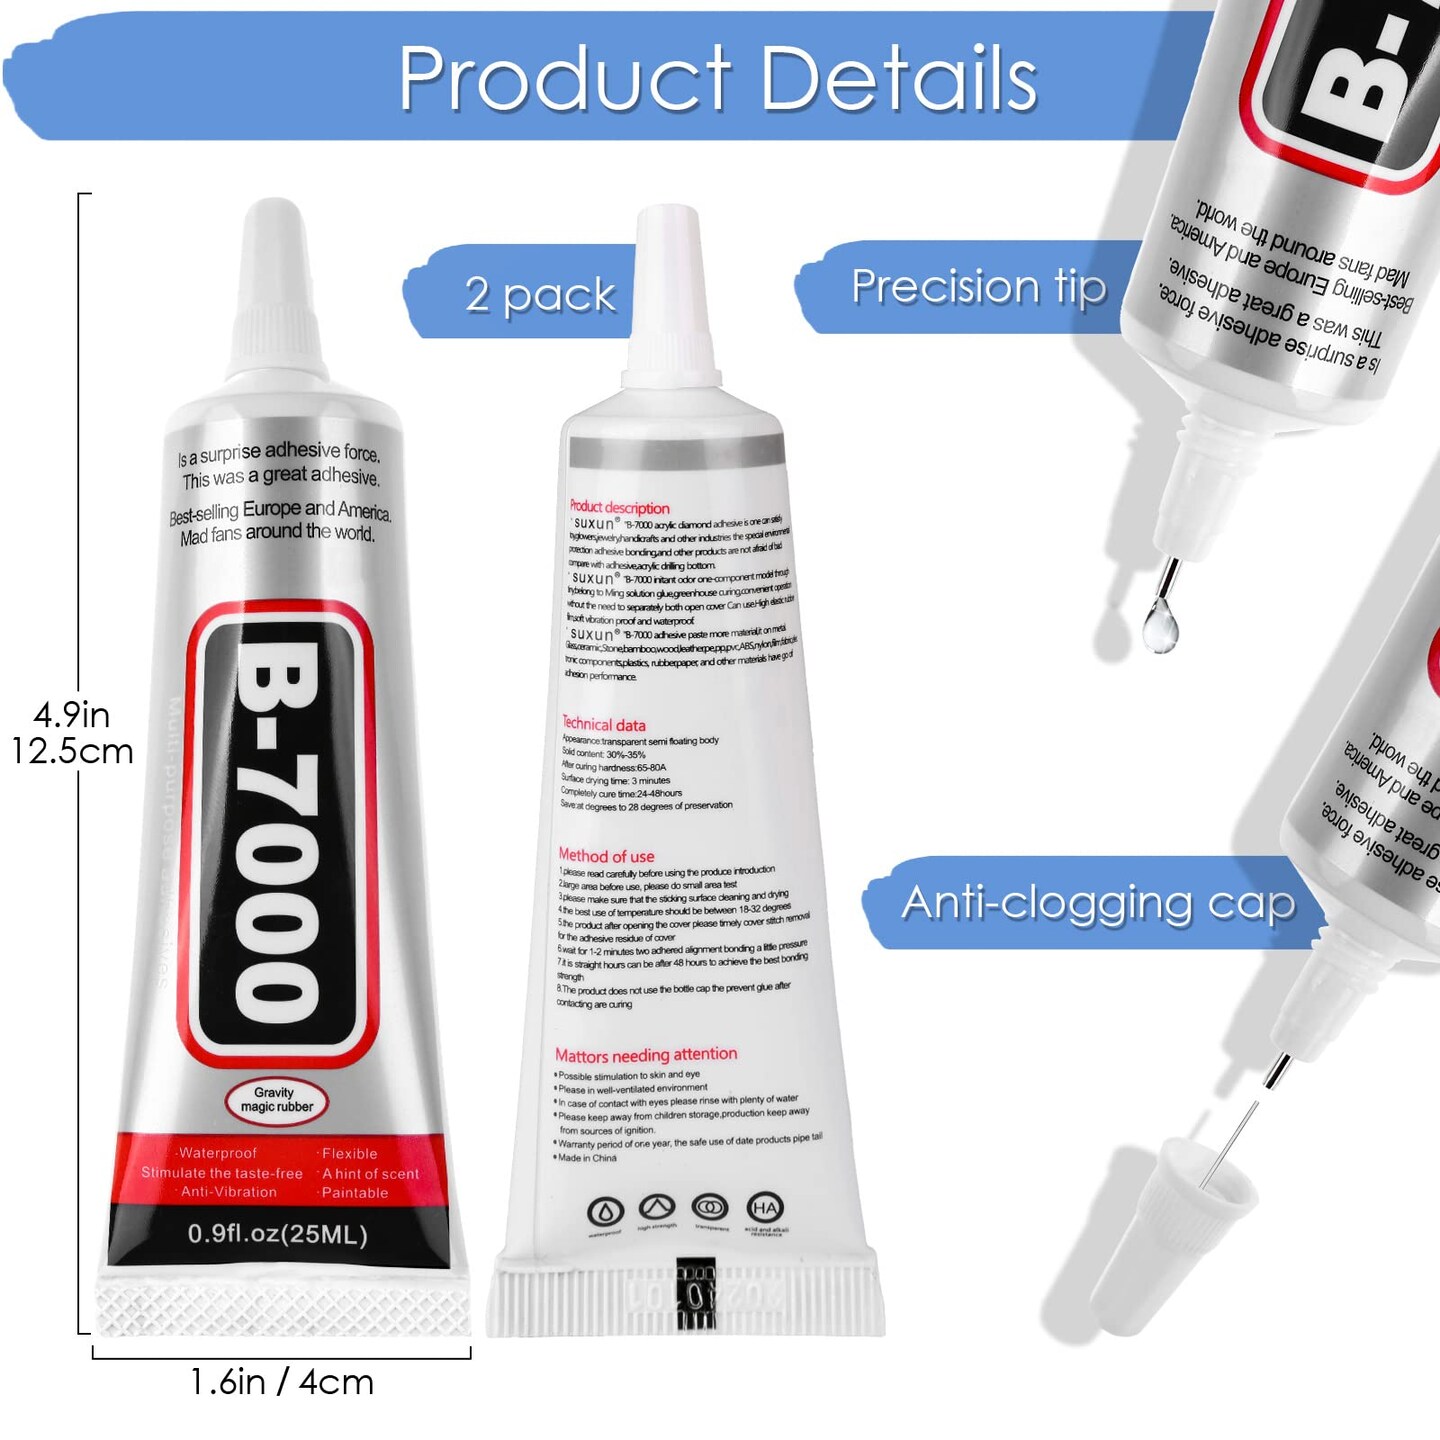 B-7000 Glue Clear for Rhinestone Crafts Review 